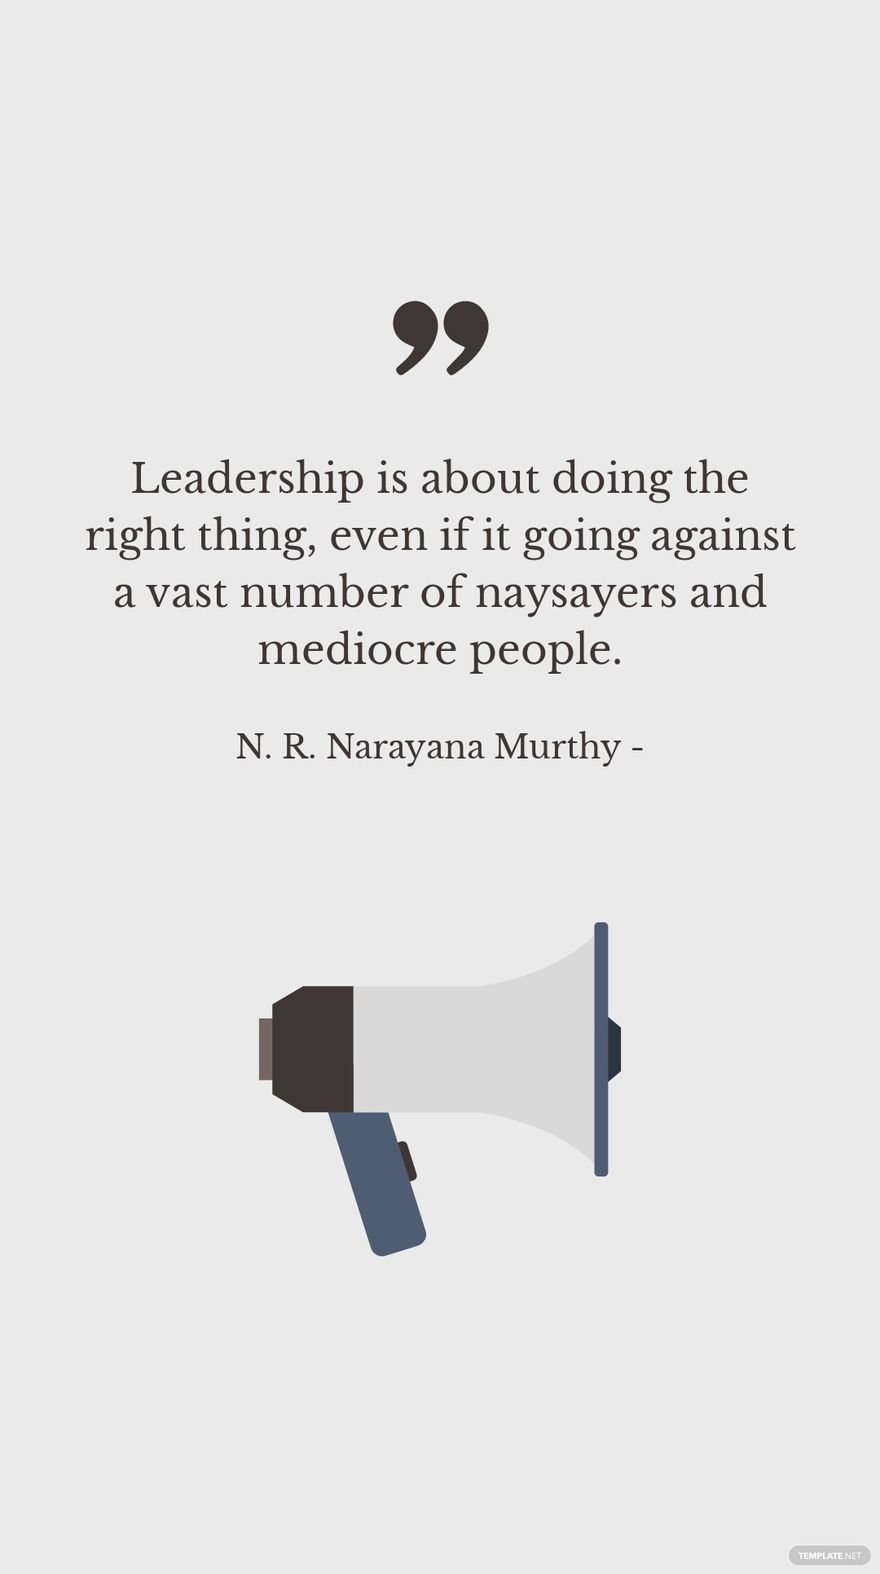 Free N. R. Narayana Murthy - Leadership is about doing the right thing, even if it going against a vast number of naysayers and mediocre people. in JPG